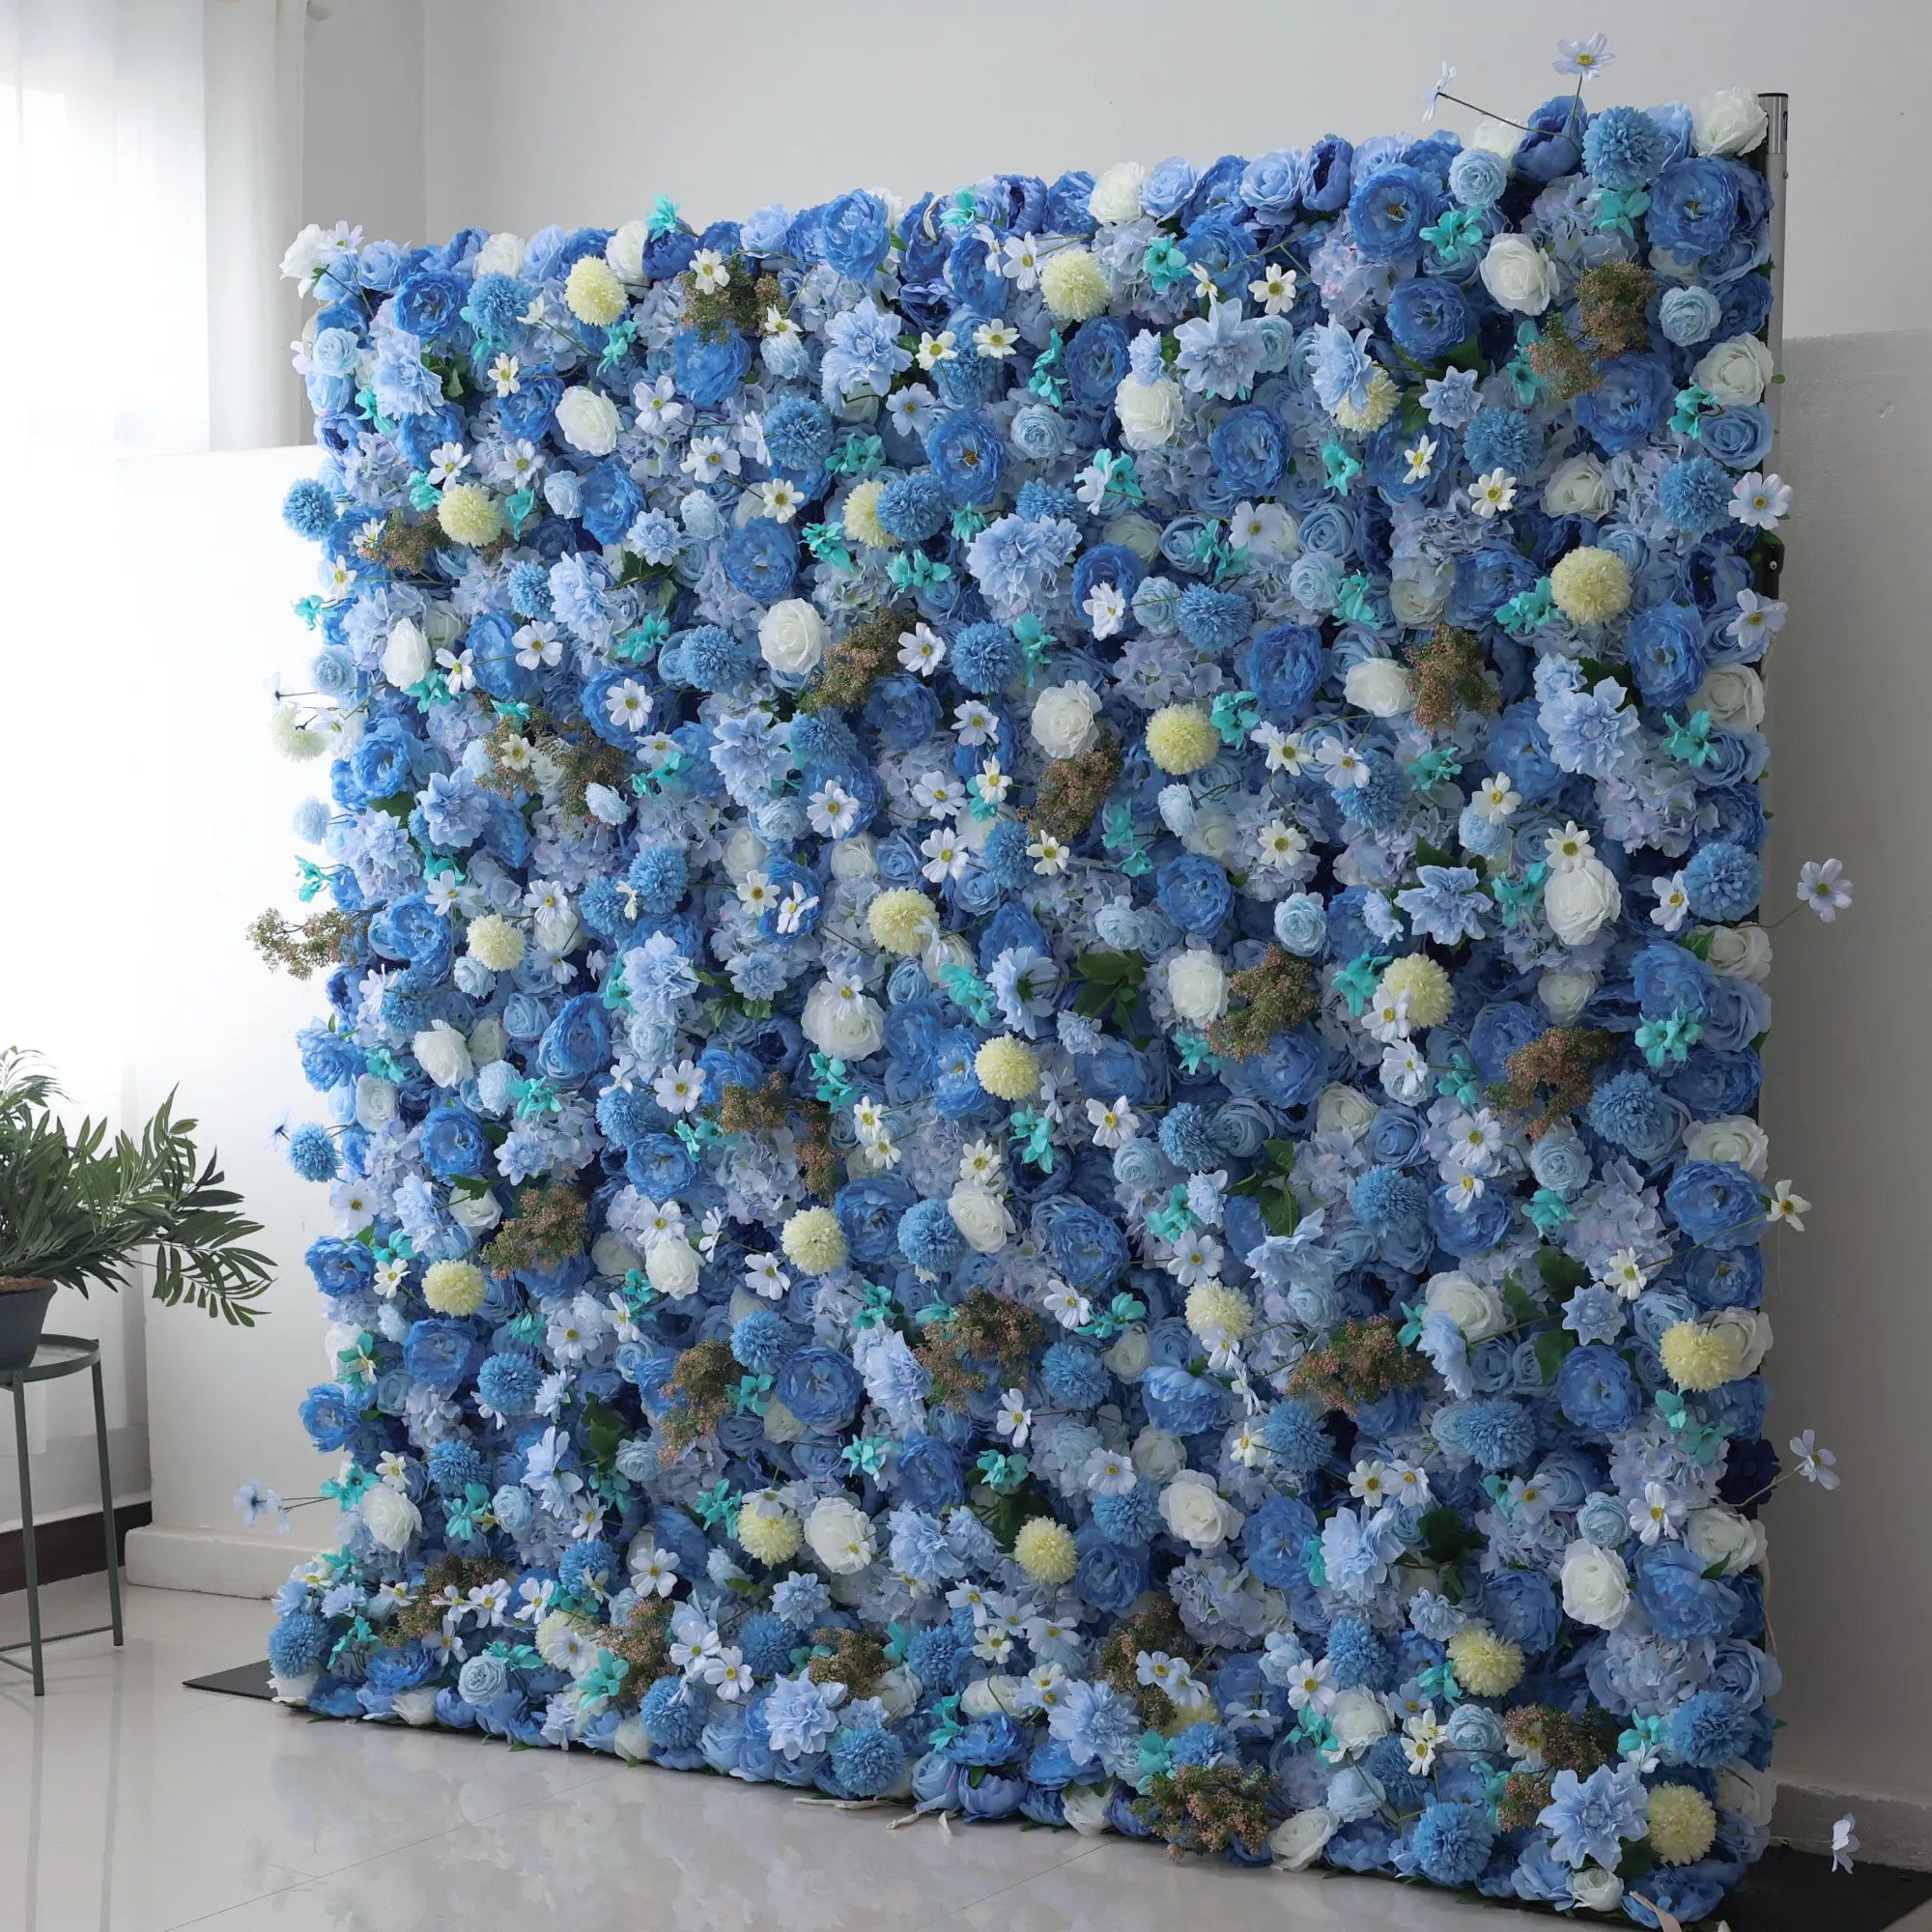 Valar Flowers' Azure Harmony: A mesmerizing blend of deep blue and pale yellow blooms, mirroring serene oceanic vistas. Perfect for events and calm interiors.